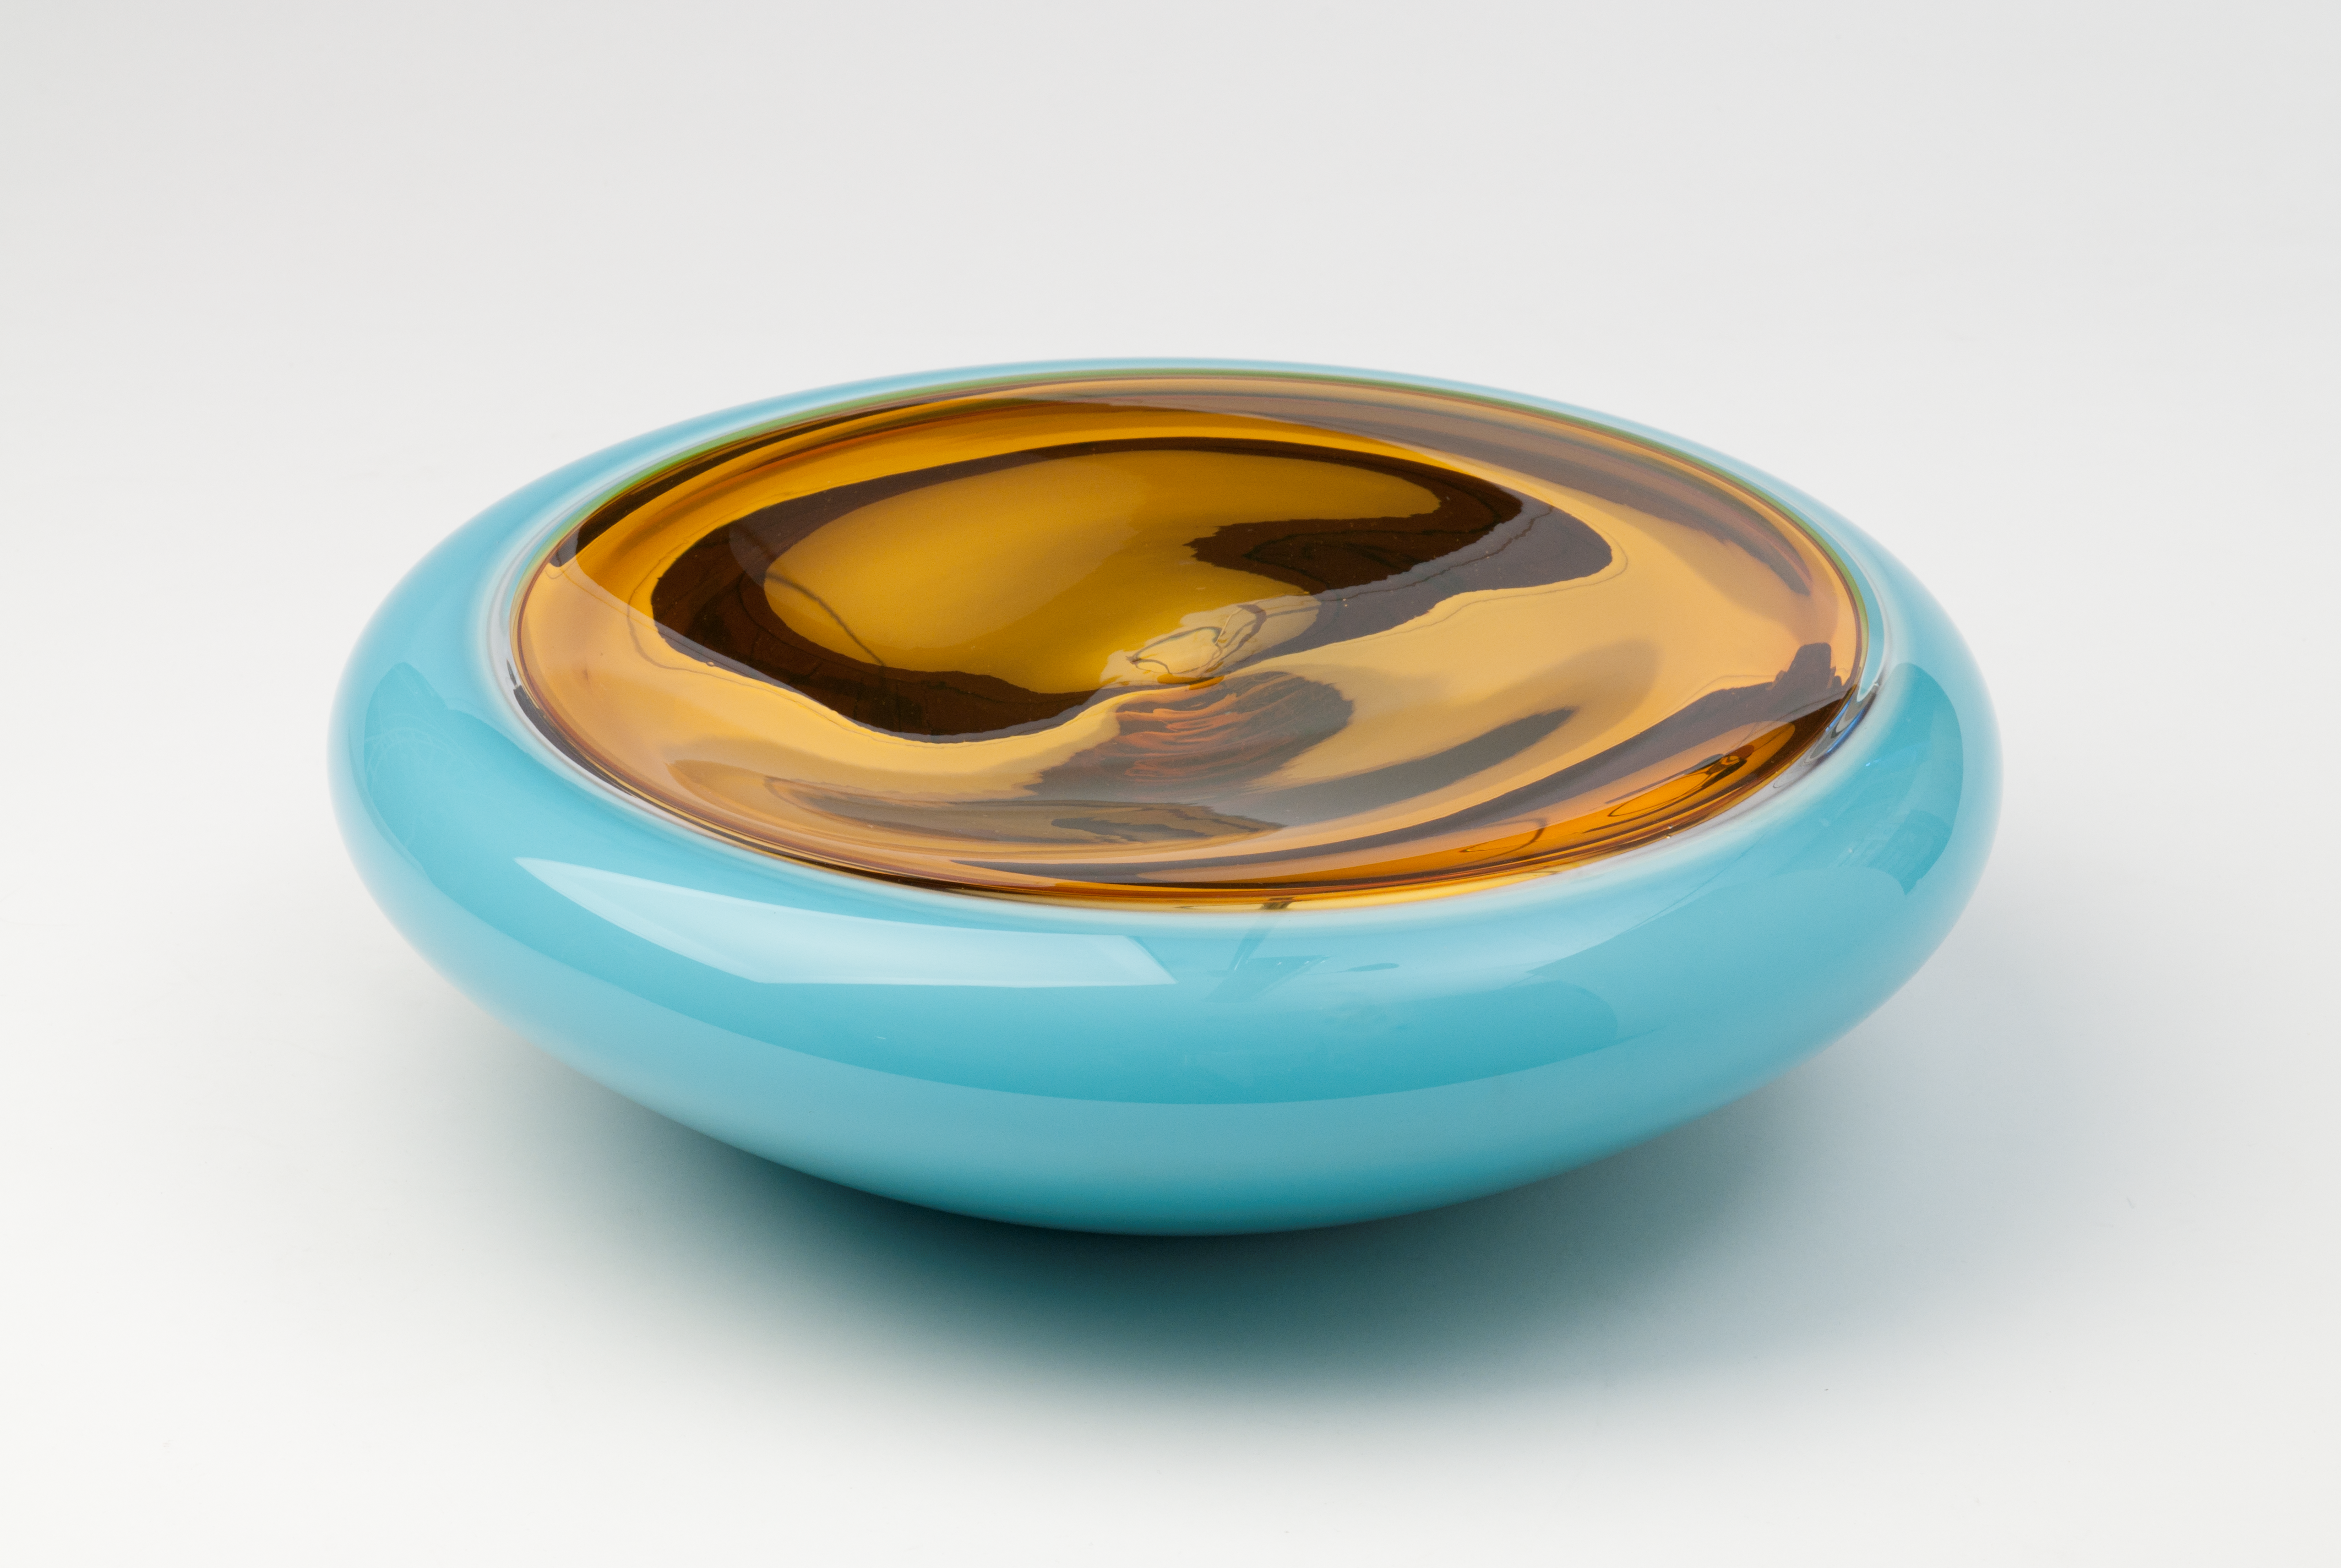 Mirrored Bowl in Gold & Light Blue